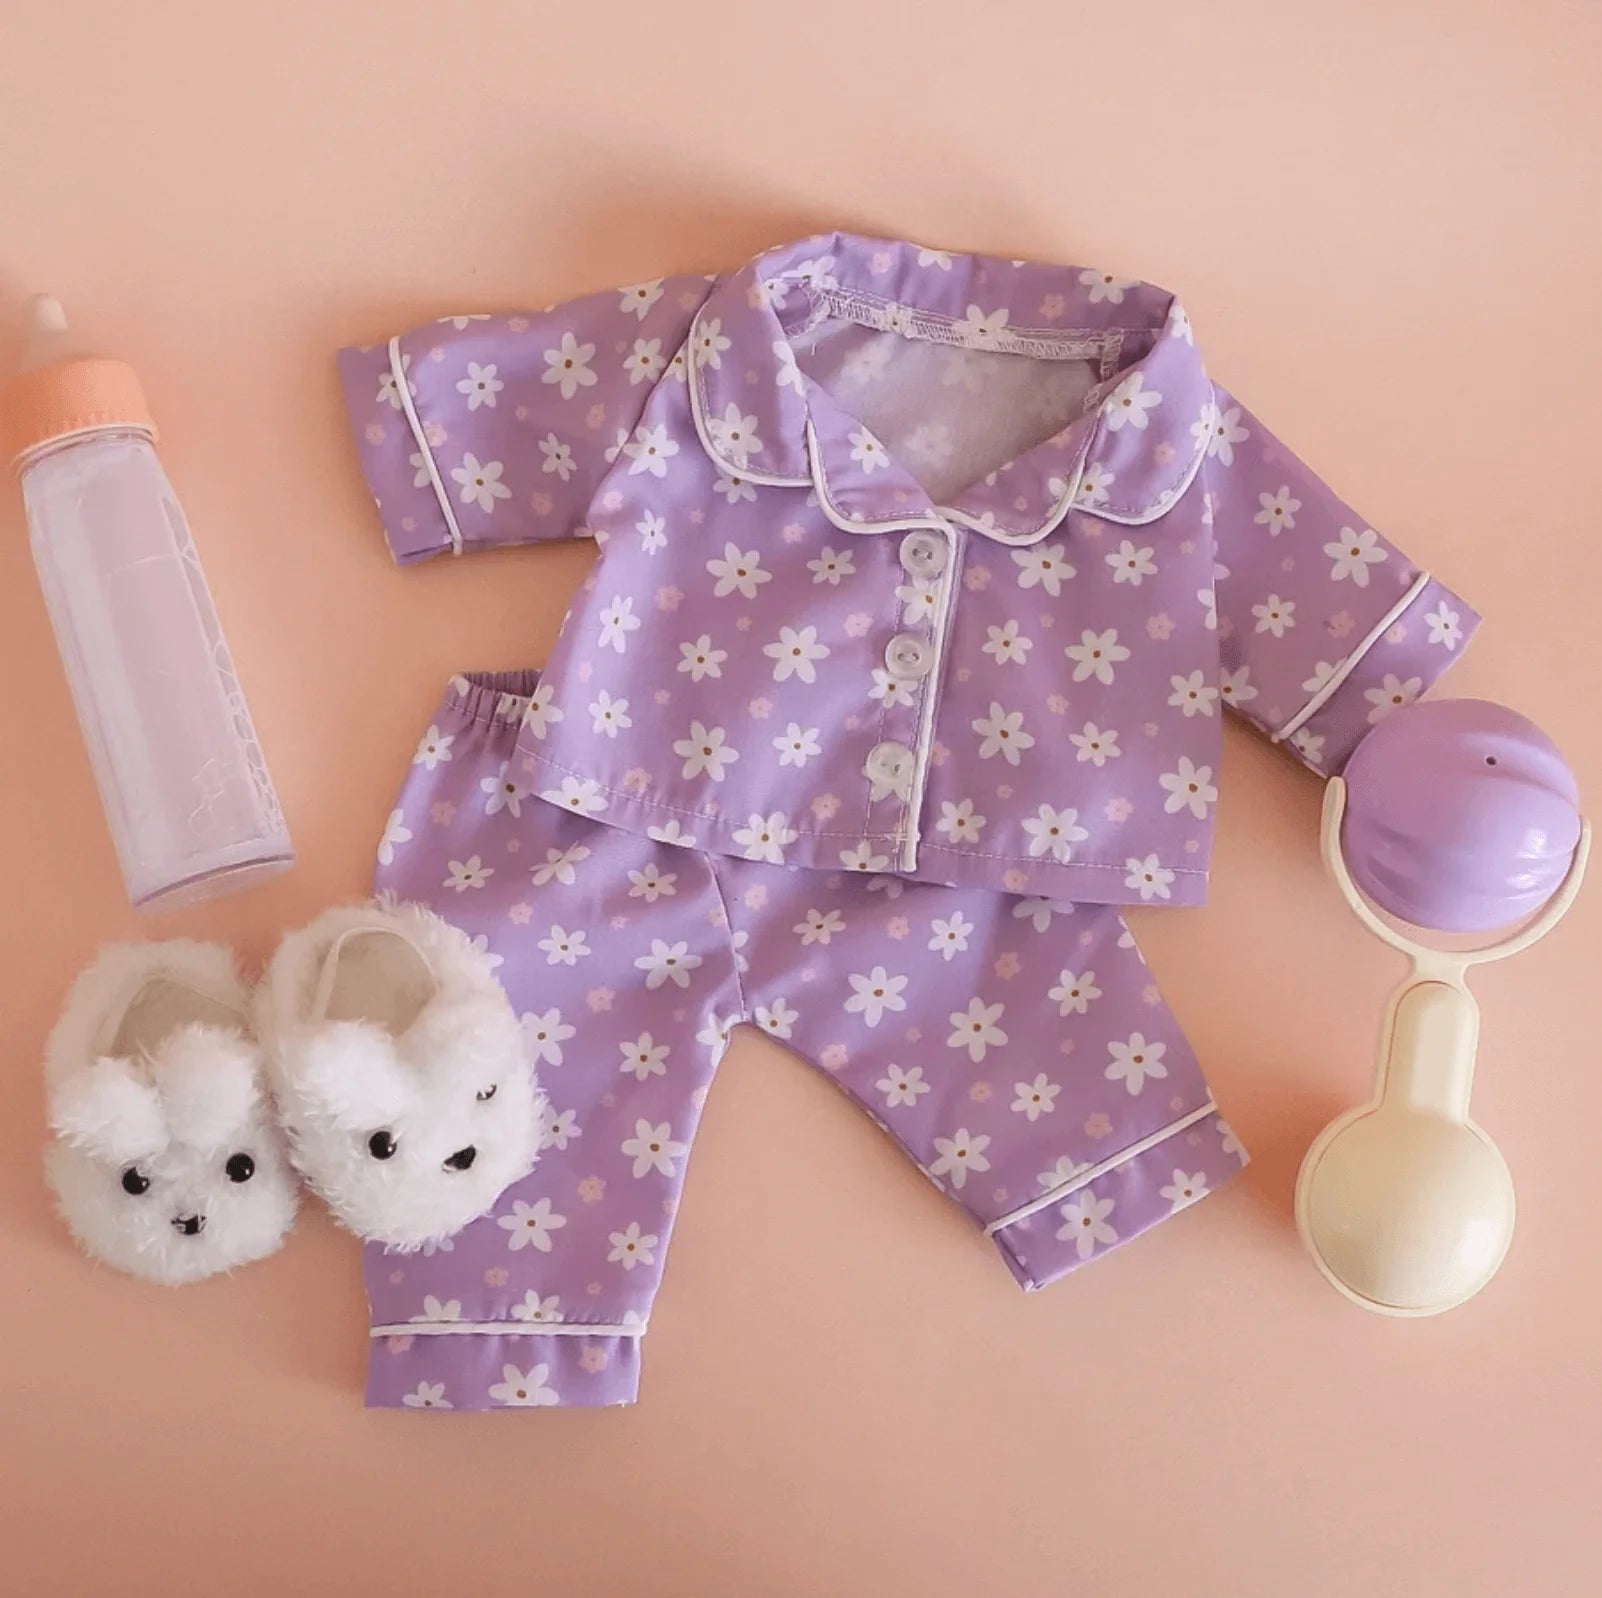 Tiny Harlow Sleepy Time Gift Set - Lavender Daisy | For Sweet Dreams and Cozy Nights!